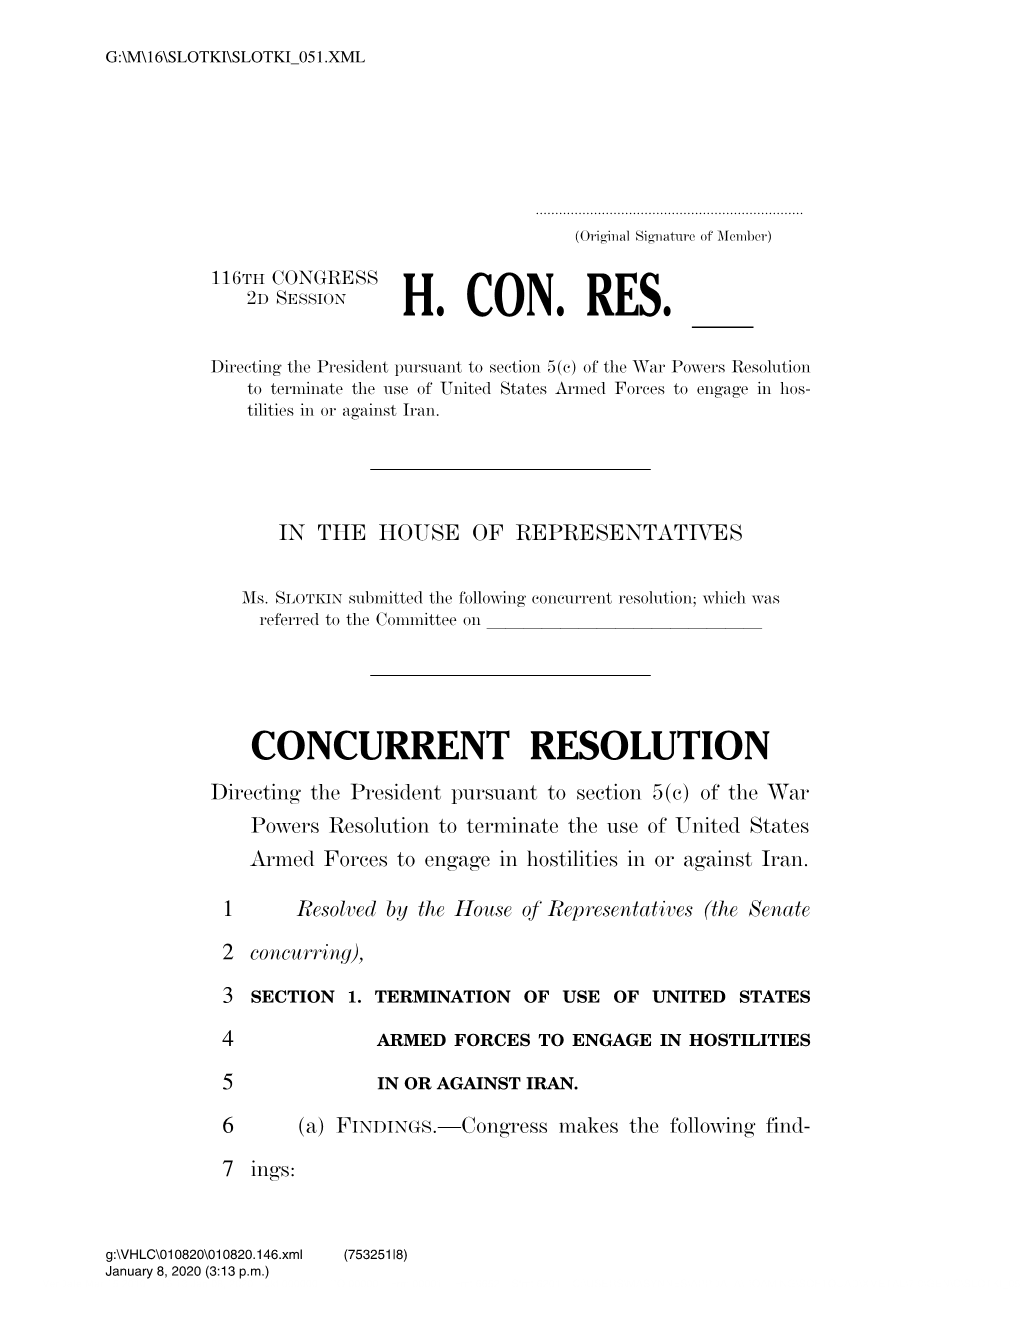 War Powers Resolution to Terminate the Use of United States Armed Forces to Engage in Hos- Tilities in Or Against Iran